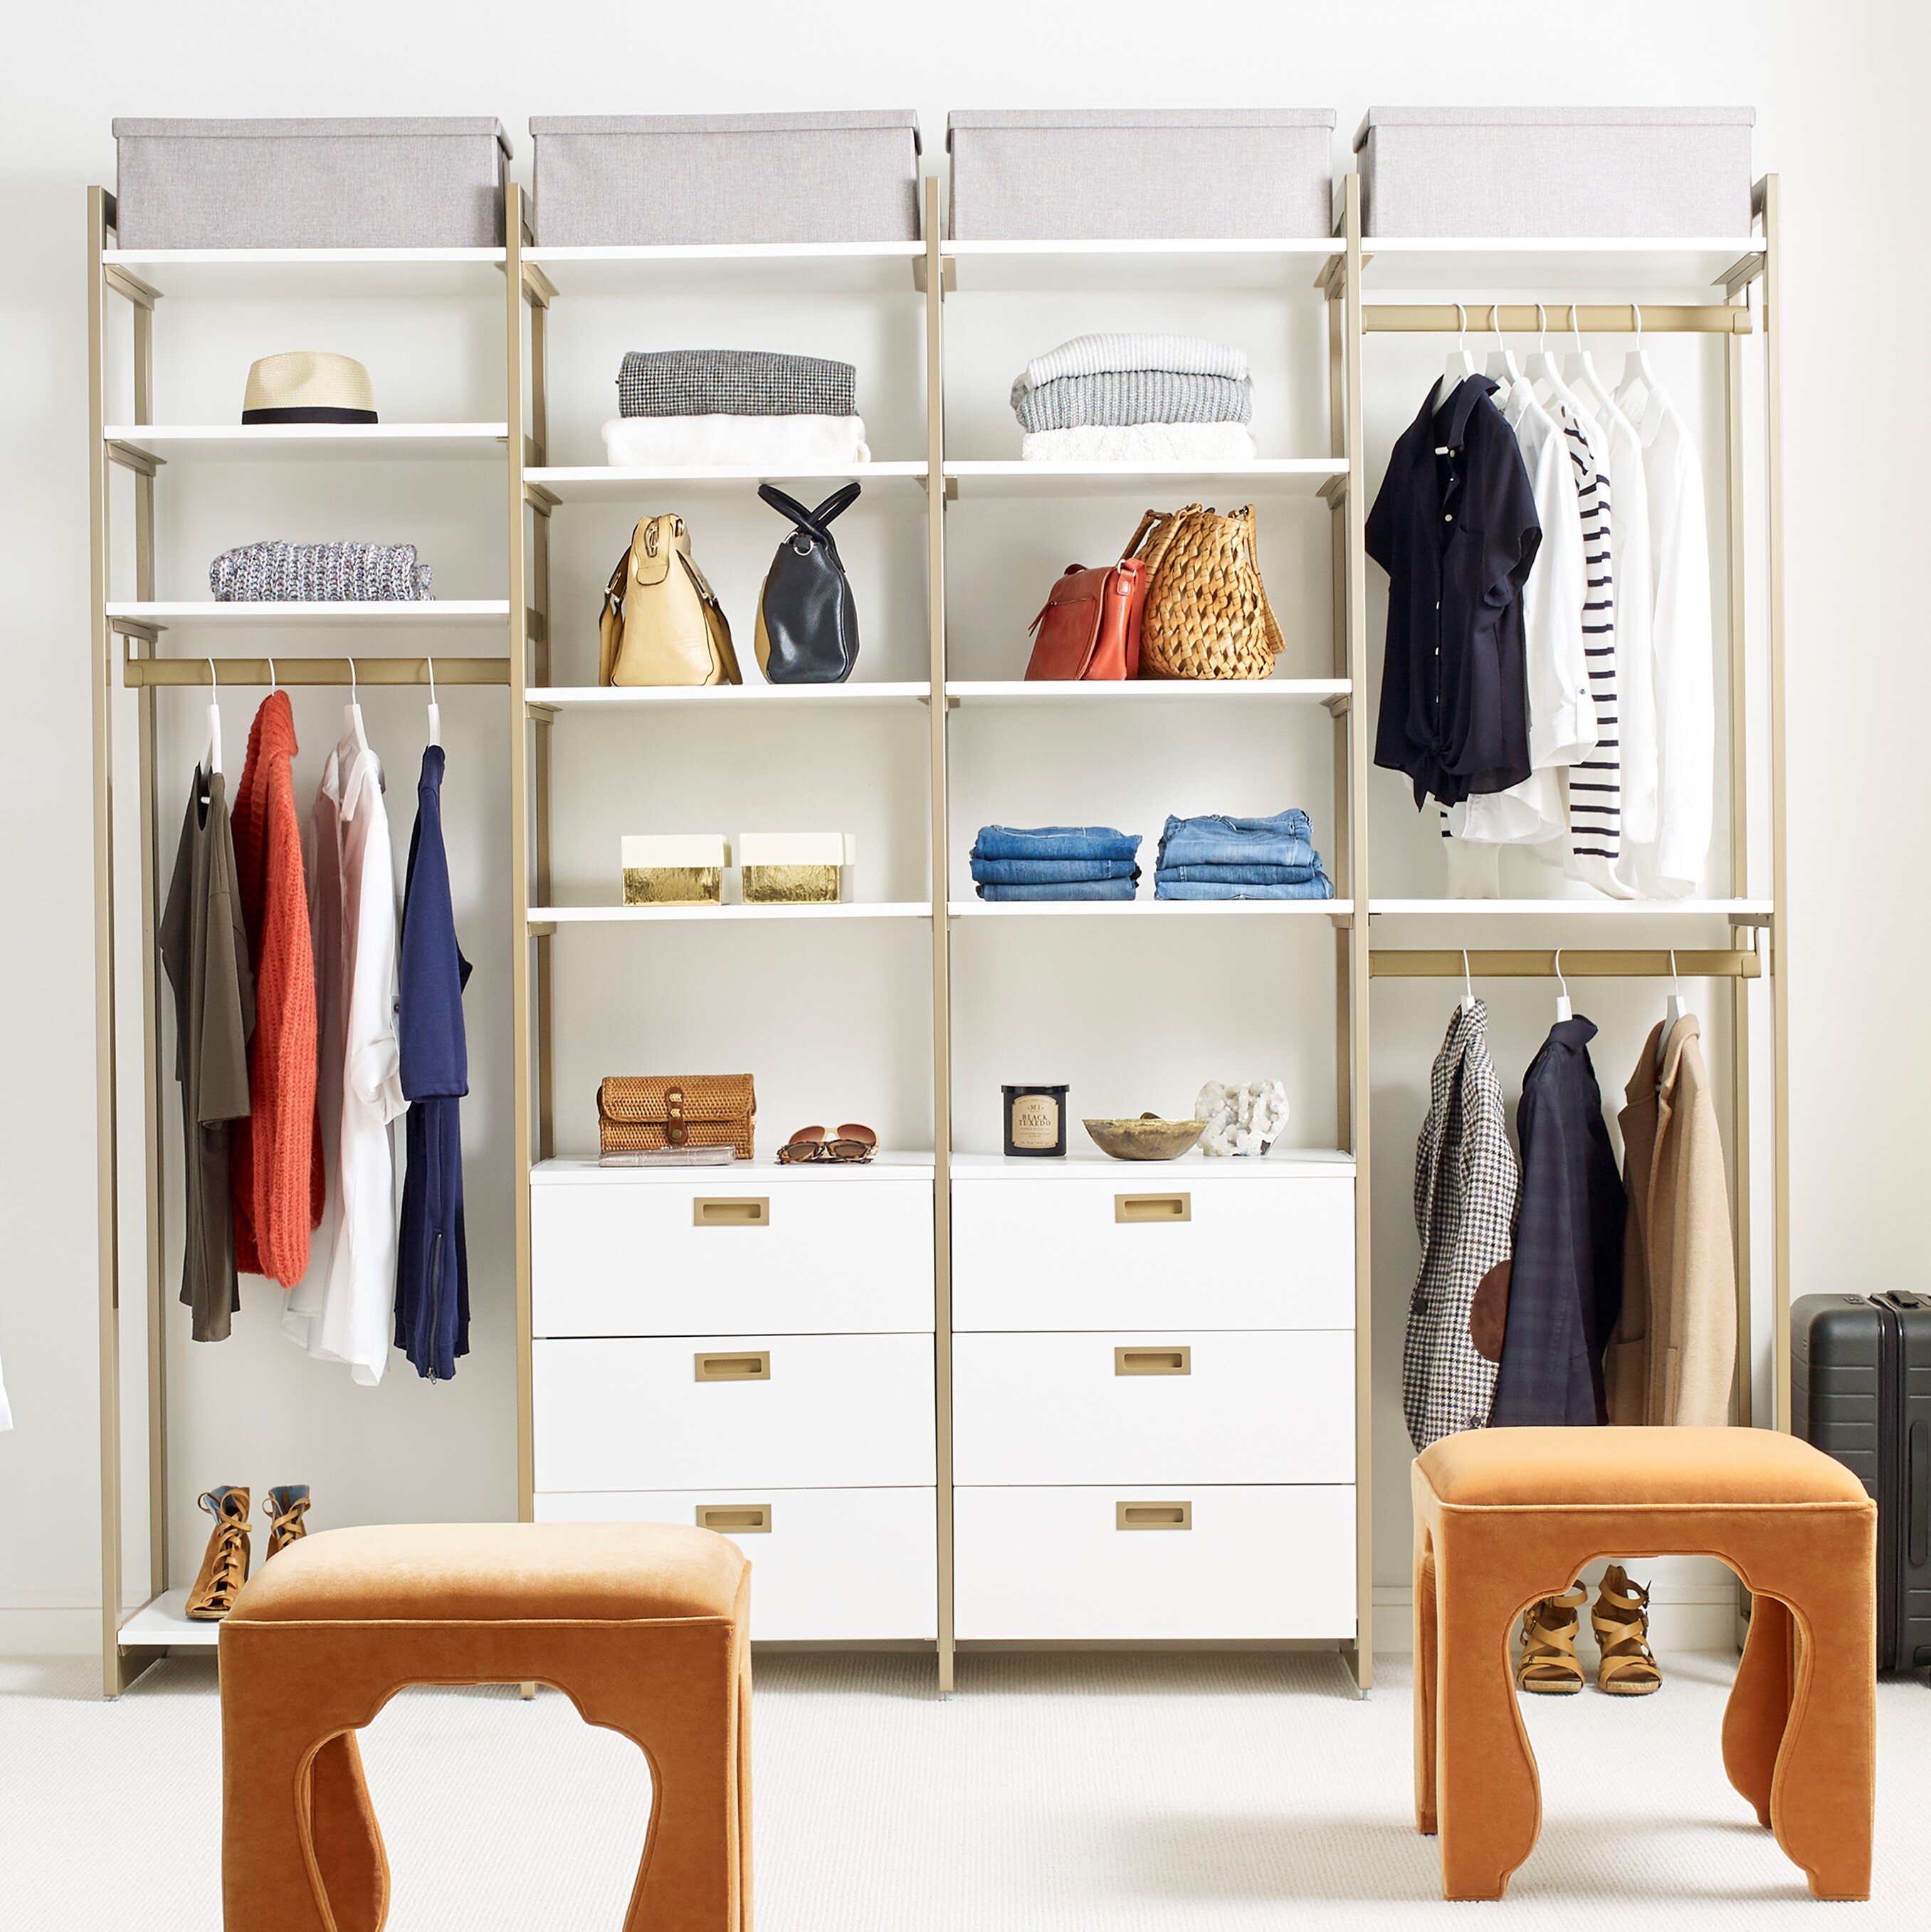 Inspiring Walk-In Closet Designs For Shoe Enthusiasts